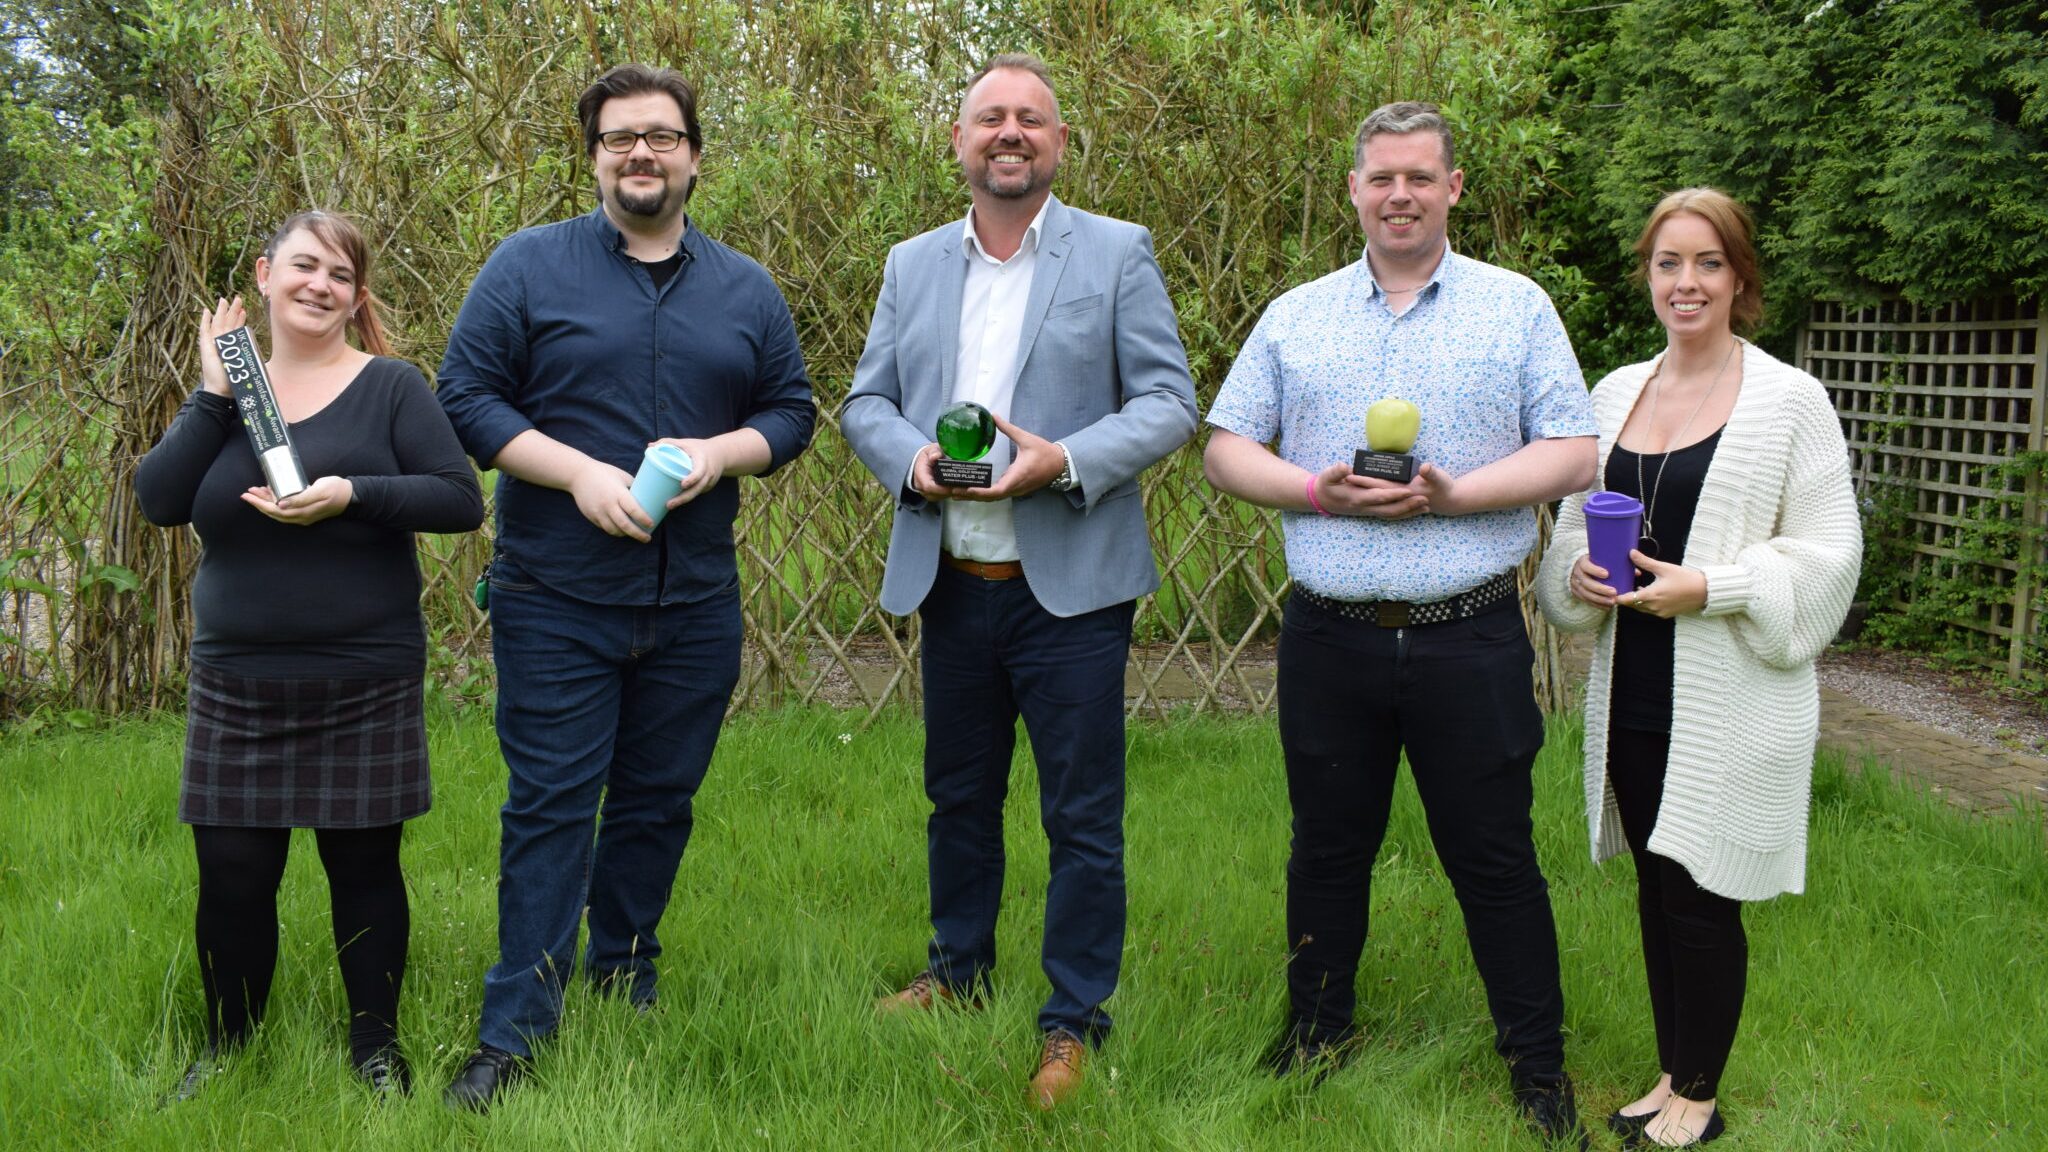 Andy Hughes, Chief Executive of Water Plus, is pictured holding the Green World Award alongside colleagues